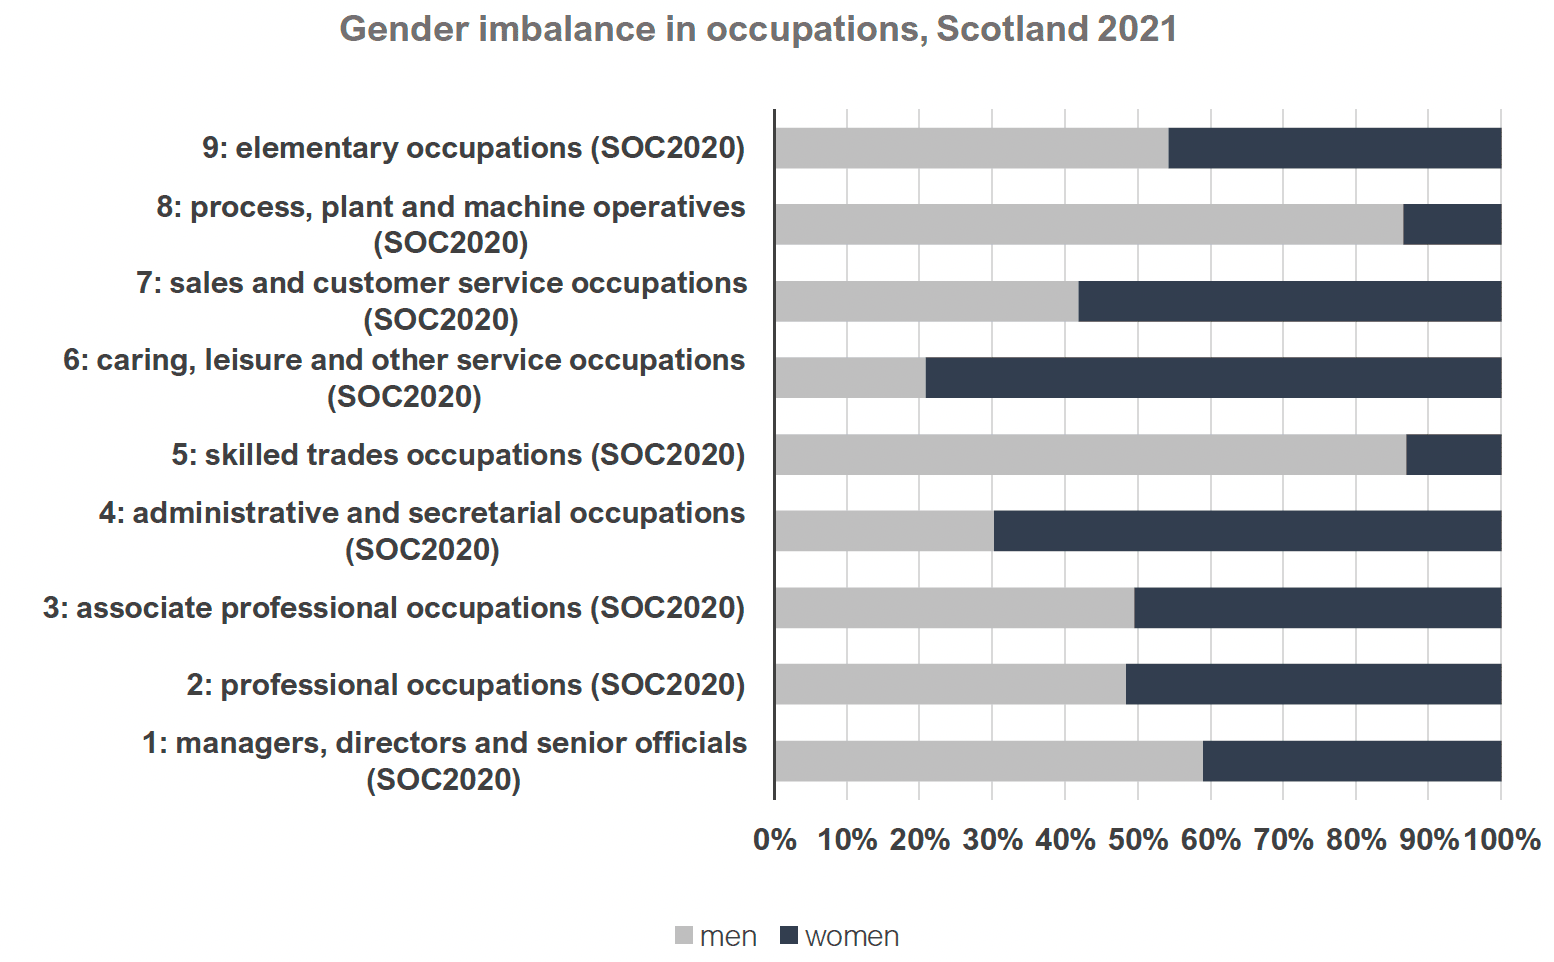 Graph depicts the gender imbalance among workers in different occupation groups, in Scotland in 2021. Among managers, directors and senior officials, 59% are men, and 41% are women. Among workers in professional occupations 48.4% are men, and 51.6% are women. Among associate professional occupations workers, 49.6% are men, and 50.4% are women. In administrative and secretarial occupations, 30.2% of workers are men, and 69.8% of workers are women. Among workers in skilled trades occupations, 87% are men, and 13% are women. Among workers in caring, leisure, and other service occupations 20.8% are men, and 79.2% are women. Among workers in sales and customer service occupations, 41.9% are men, and 58.1% are women. Among workers in process, plant and machine operatives, 86.5% are men, and 13.5% are women. Finally, among elementary occupations, 54.3% of workers are men, and 45.7% of workers are women.